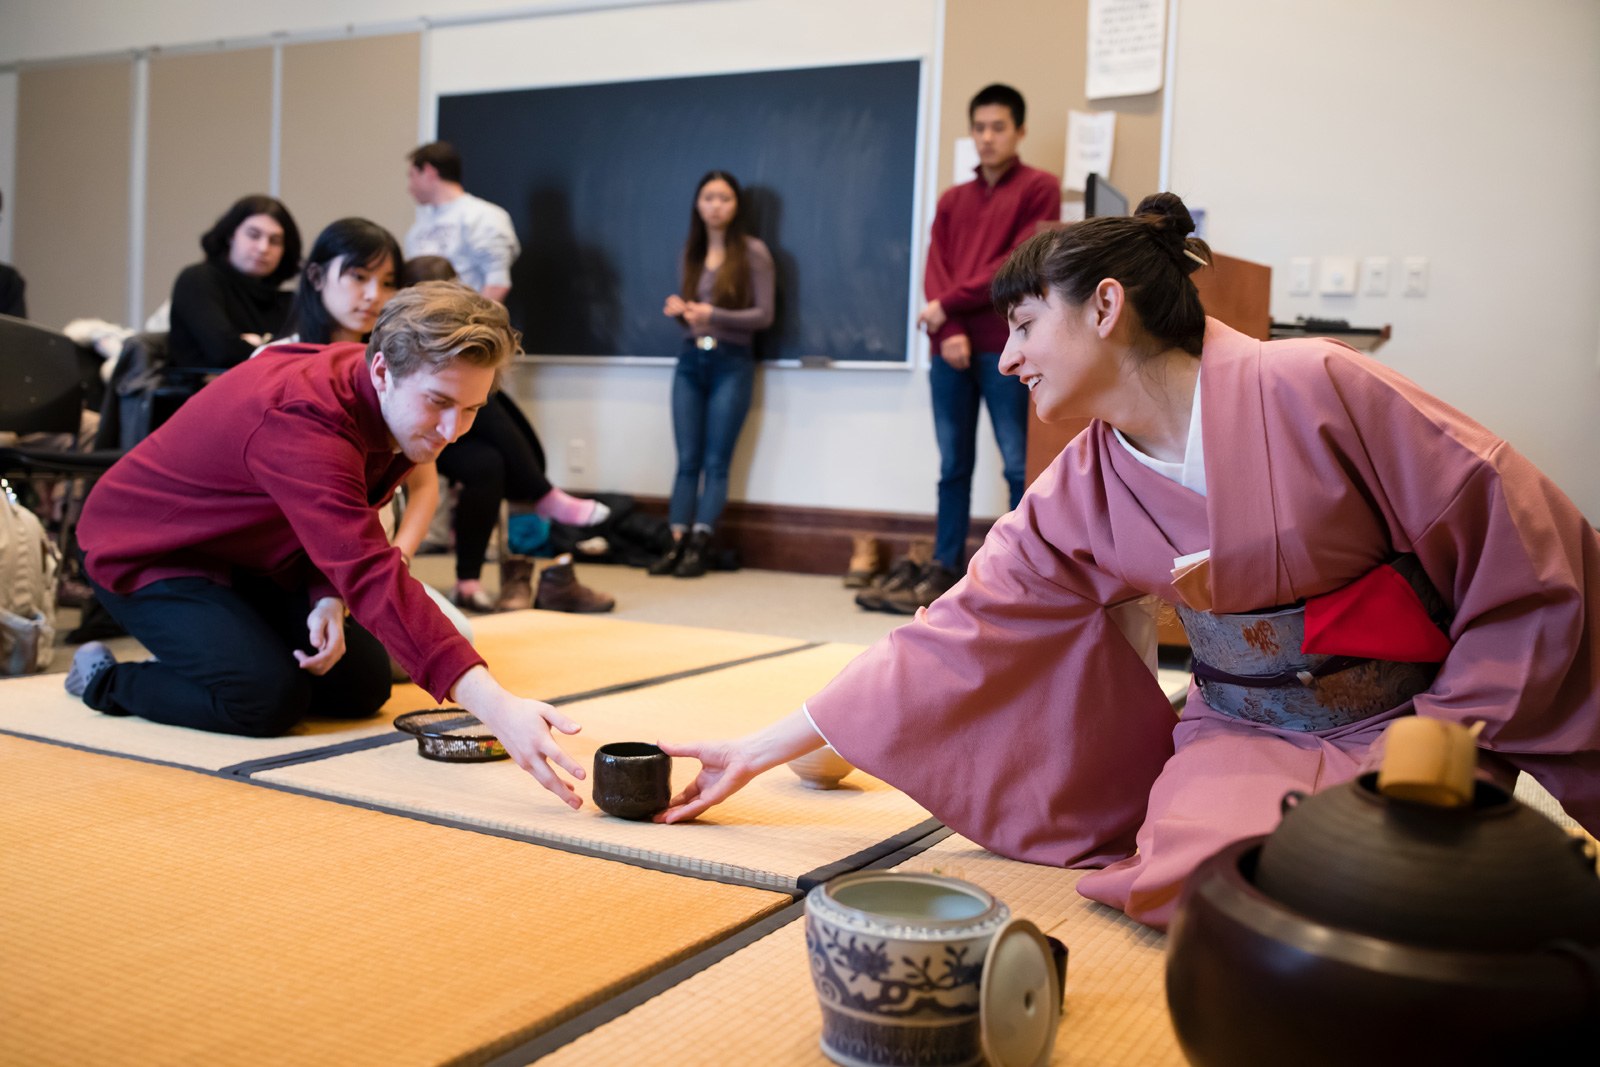 The ceremony leader, dressed in a kimono, hands a cup of tea to a student